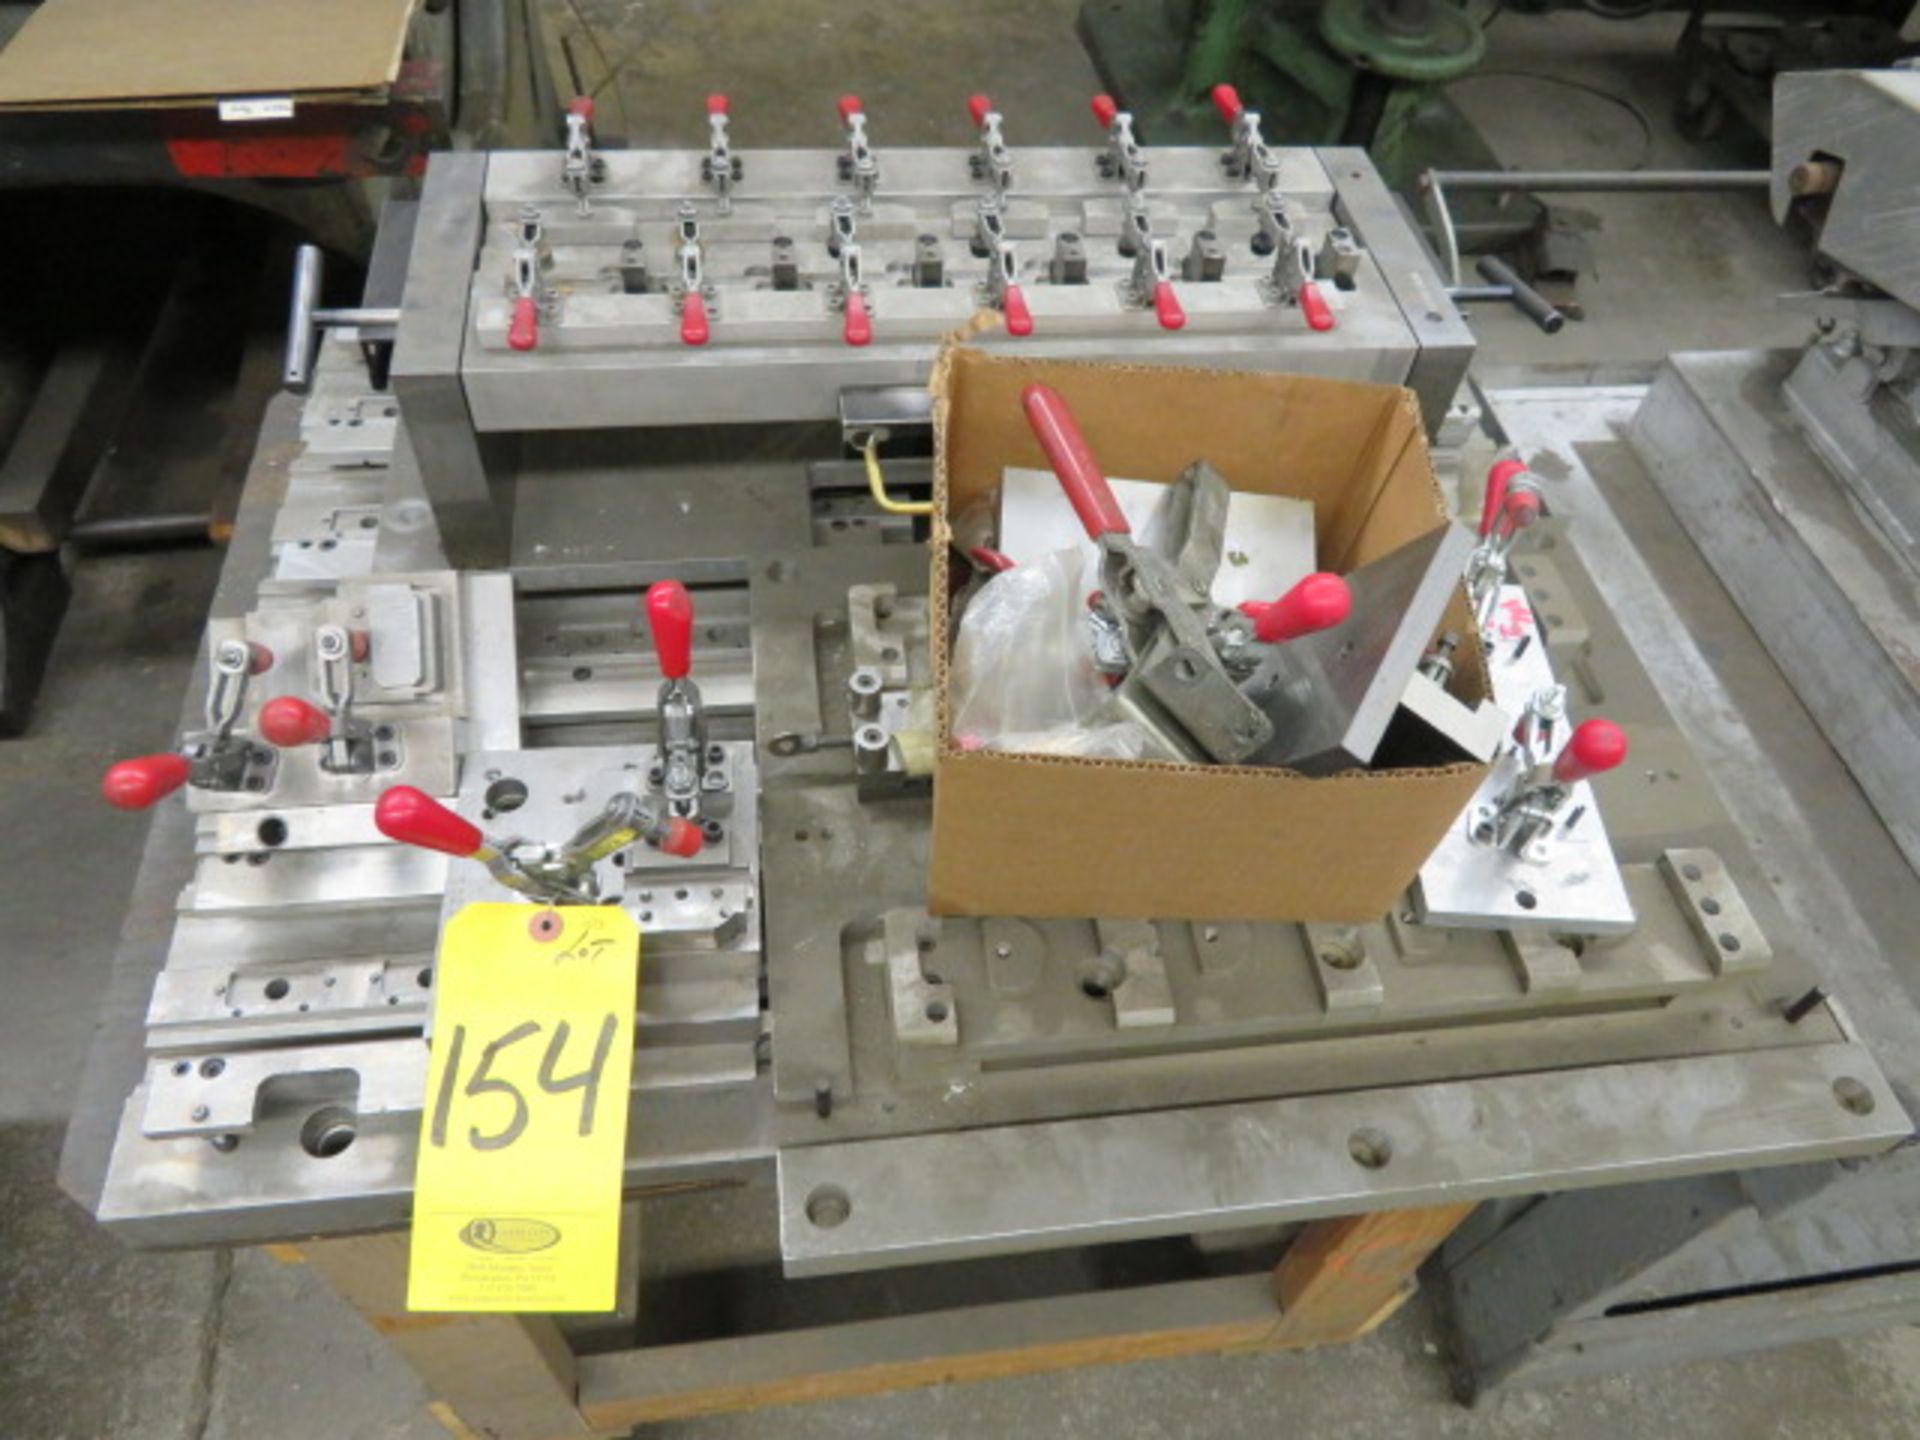 ASSORTED JIG CLAMPS, PLATES AND CART